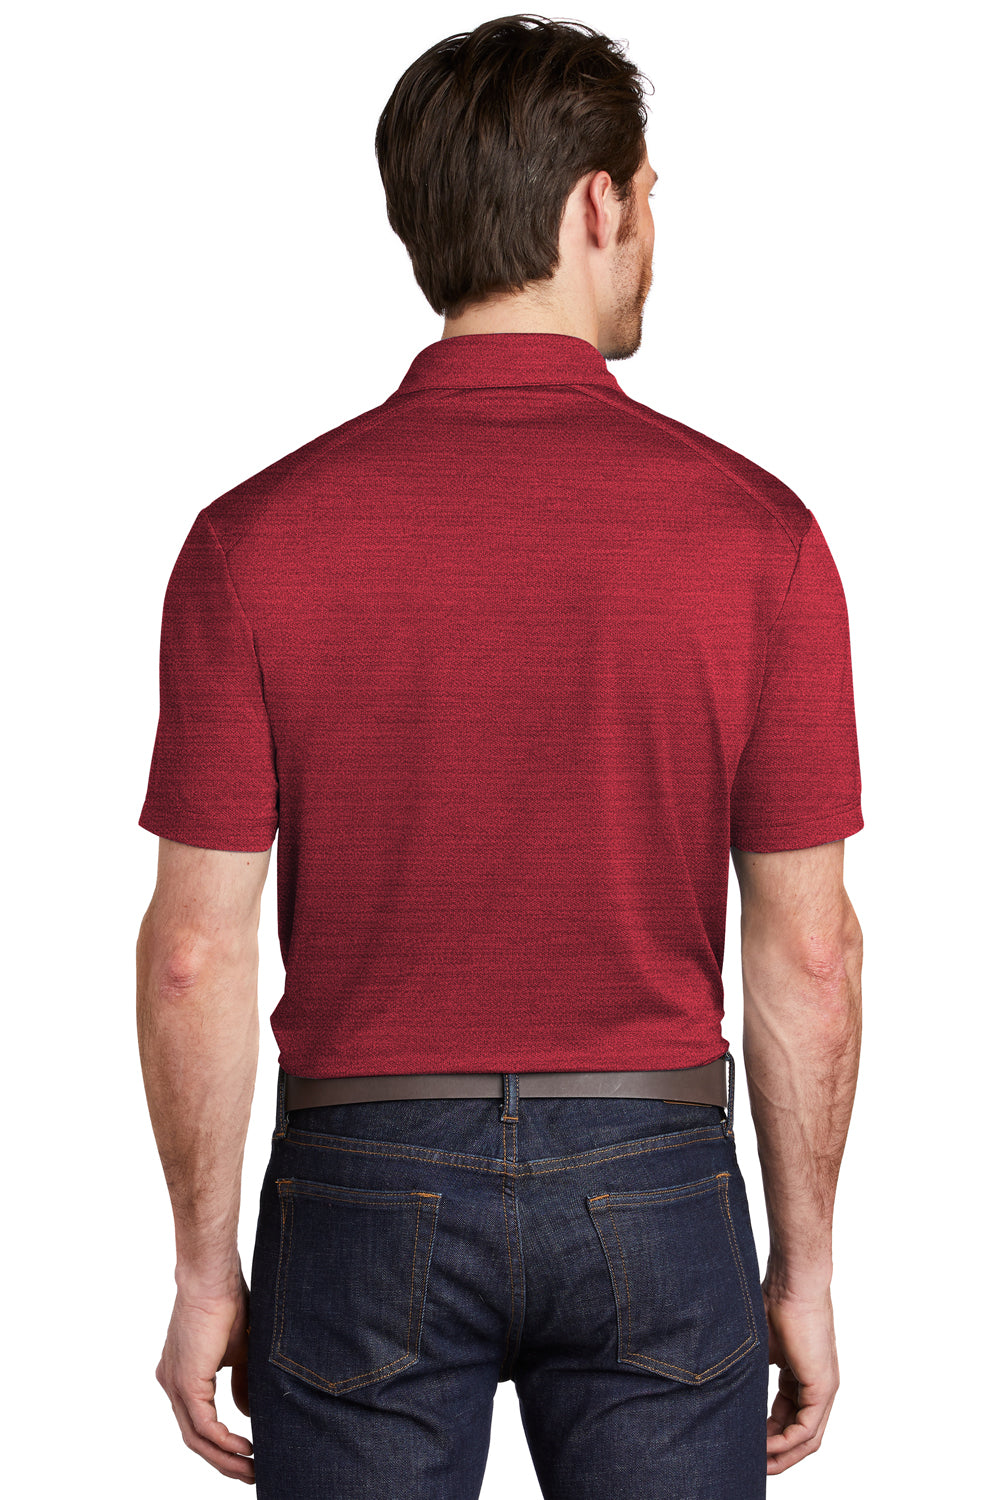 Port Authority Mens Stretch Short Sleeve Polo Shirt Red/Black Side